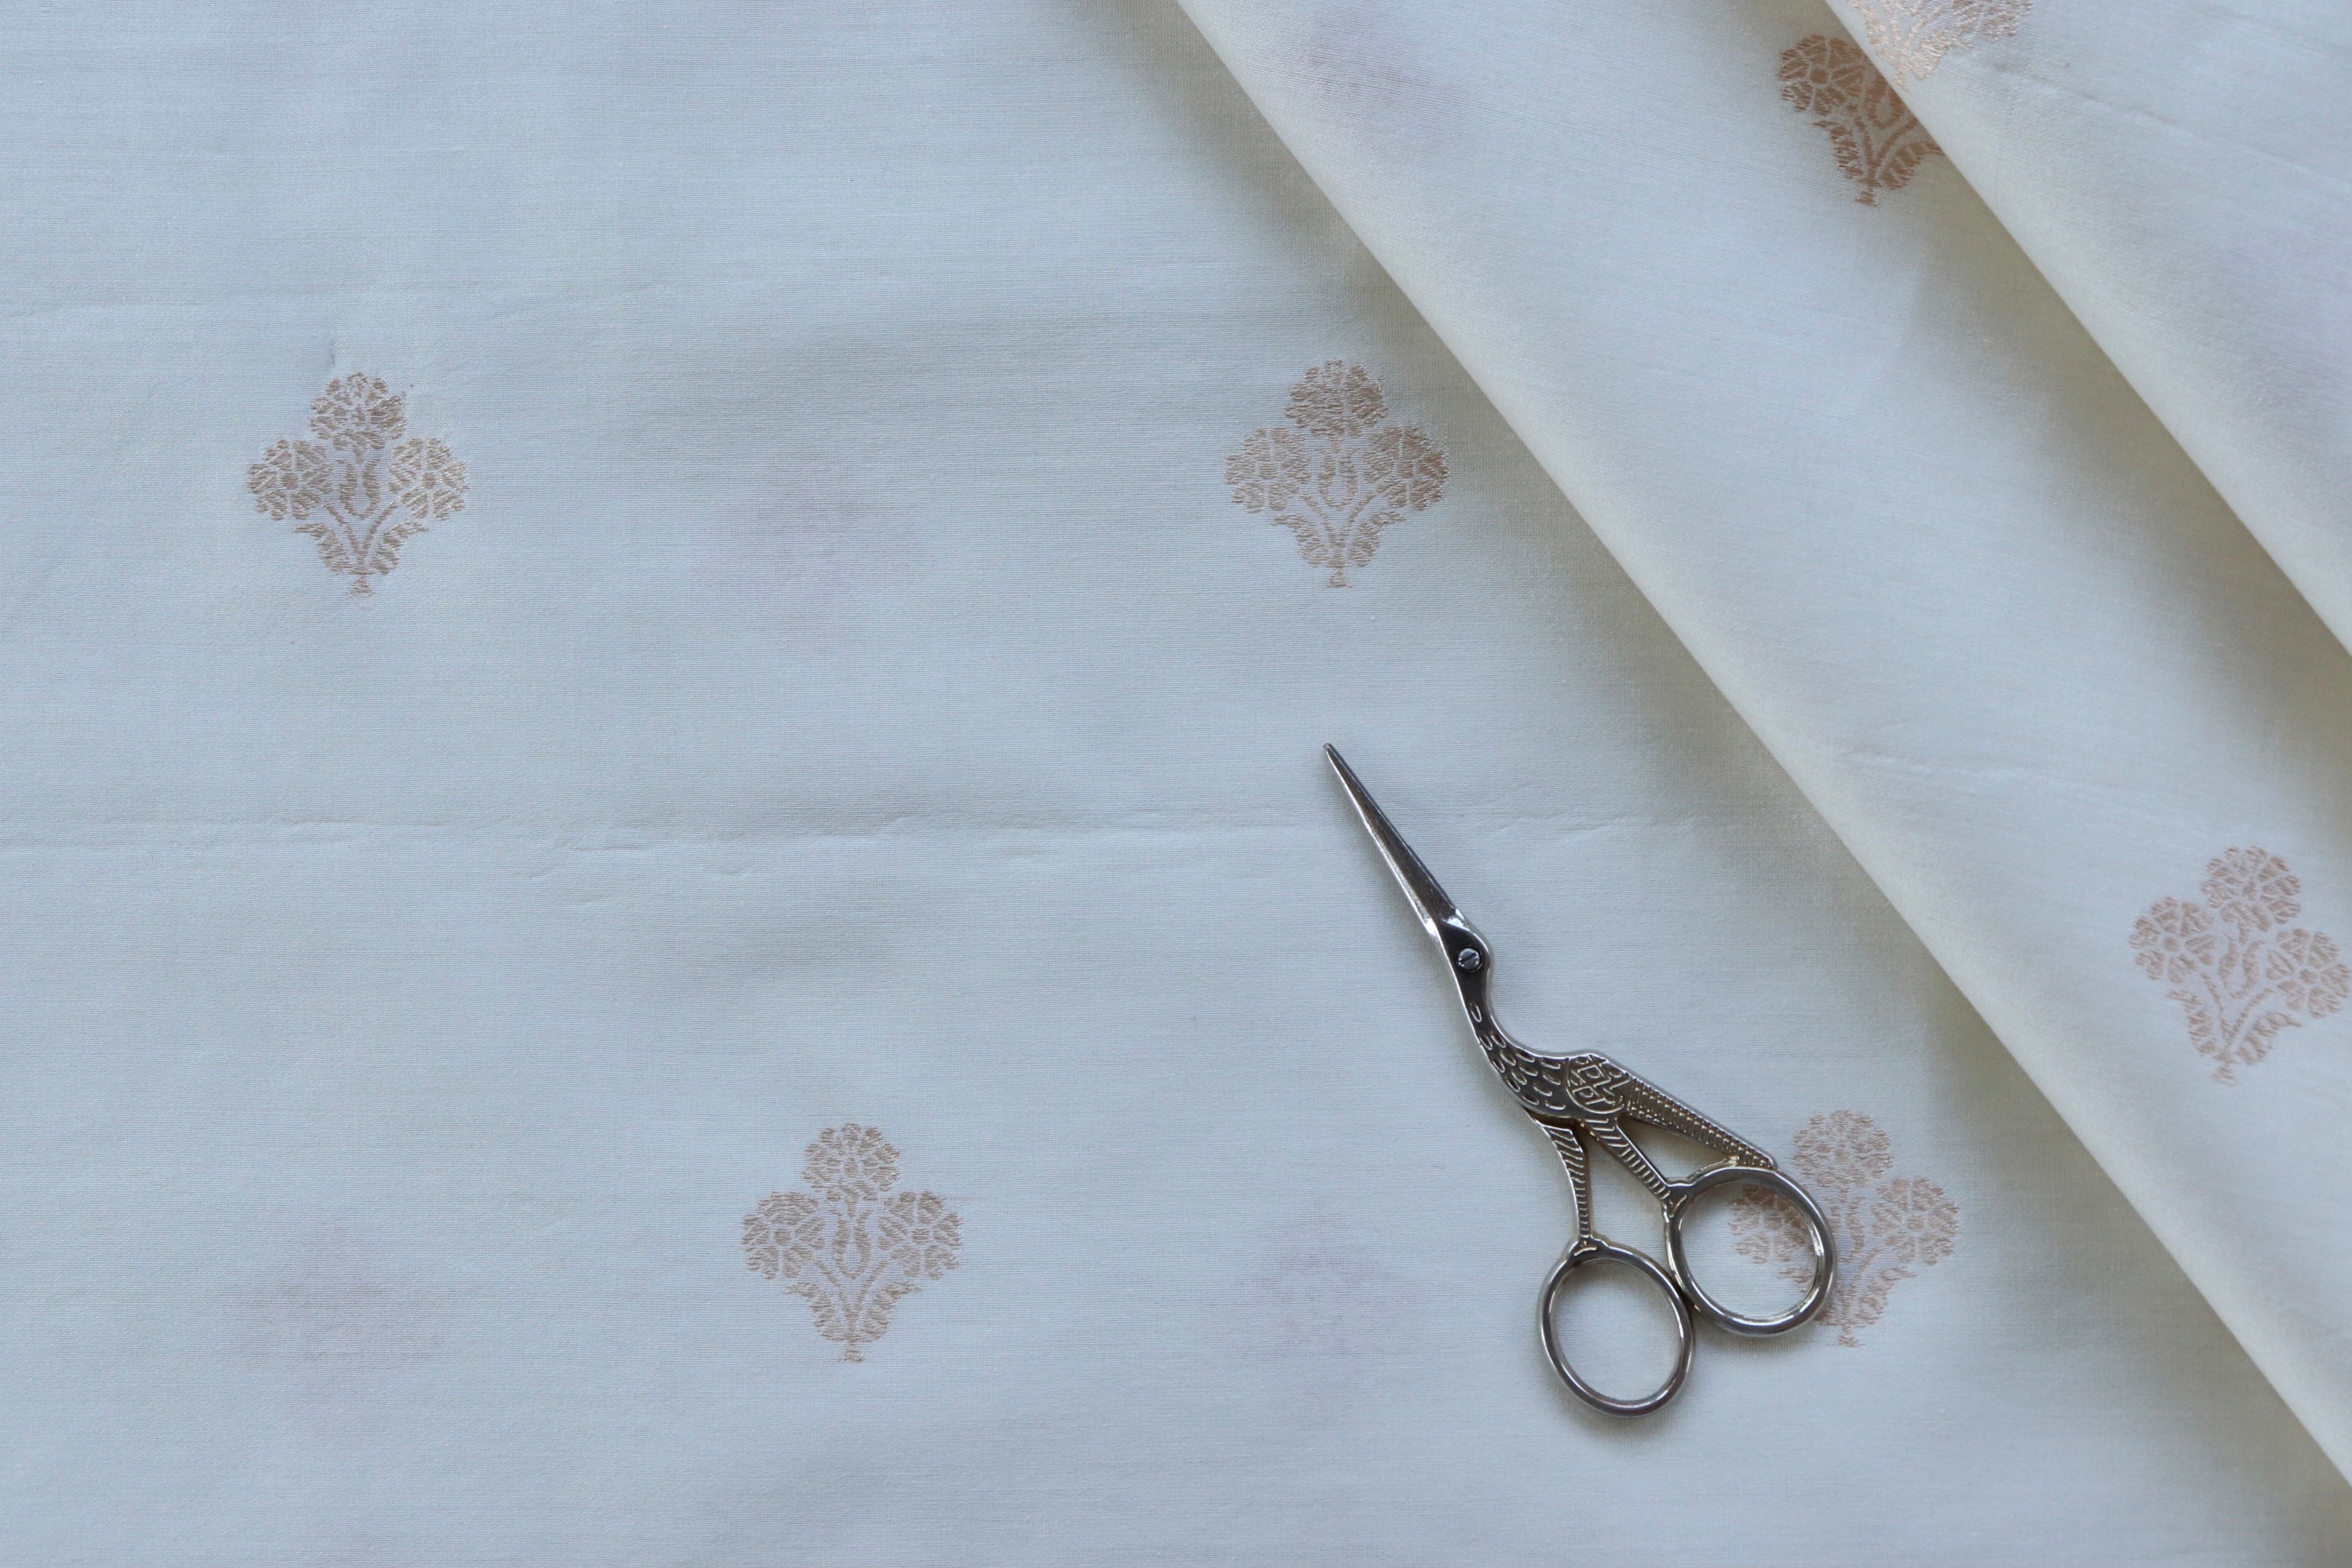 White Floral Motif Silk By Cotton Handloom Fabric Thaan